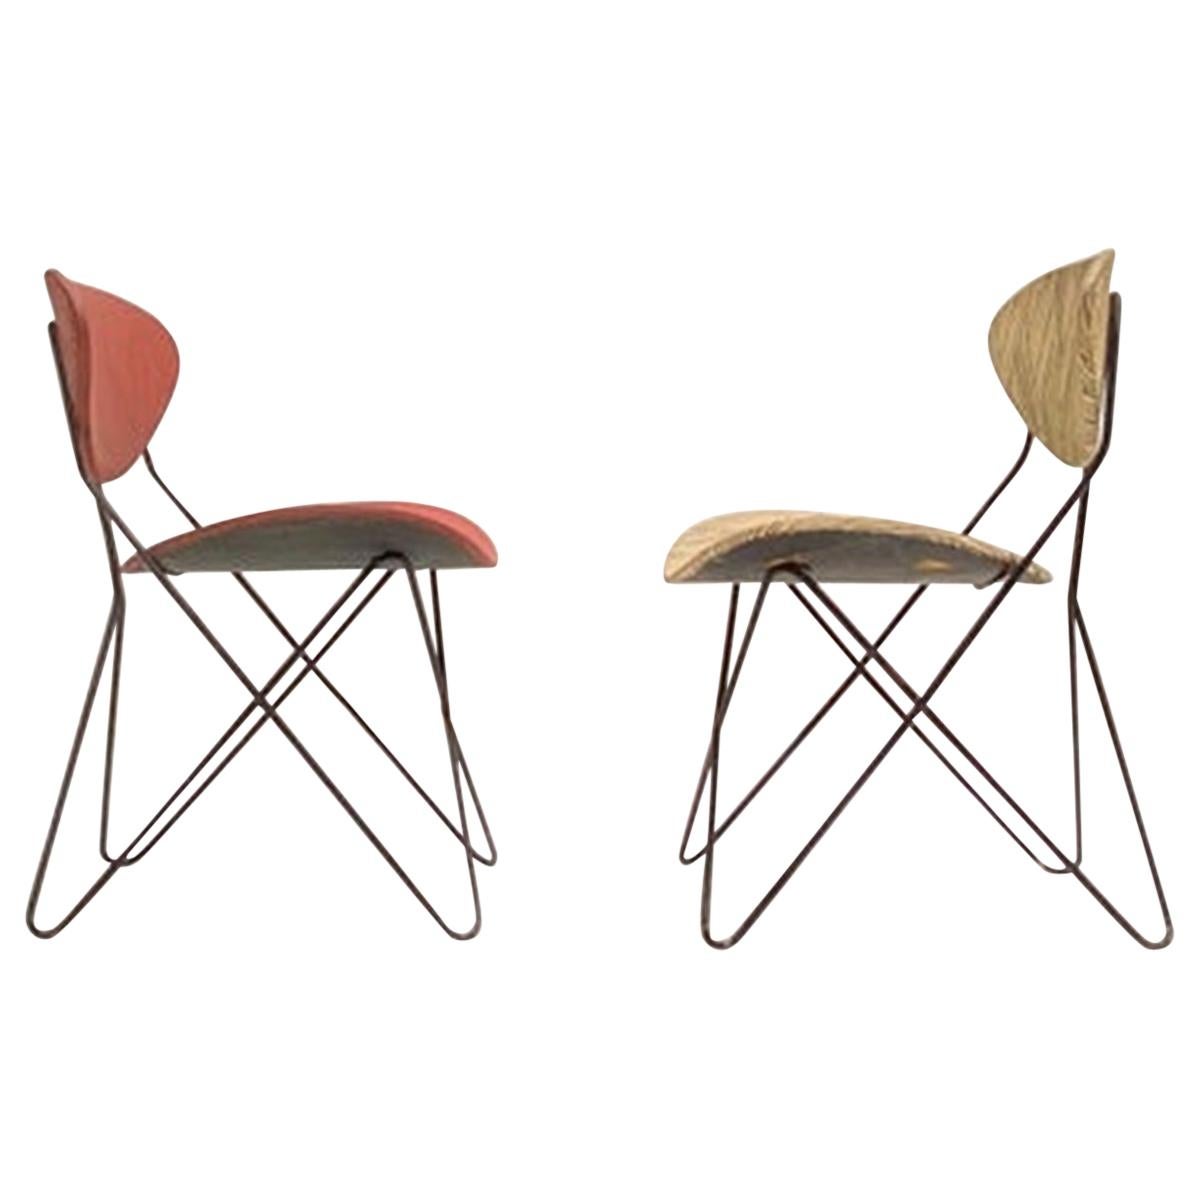 1950s Chairs - 2,100 For Sale at 1stDibs | 1950s chair styles 